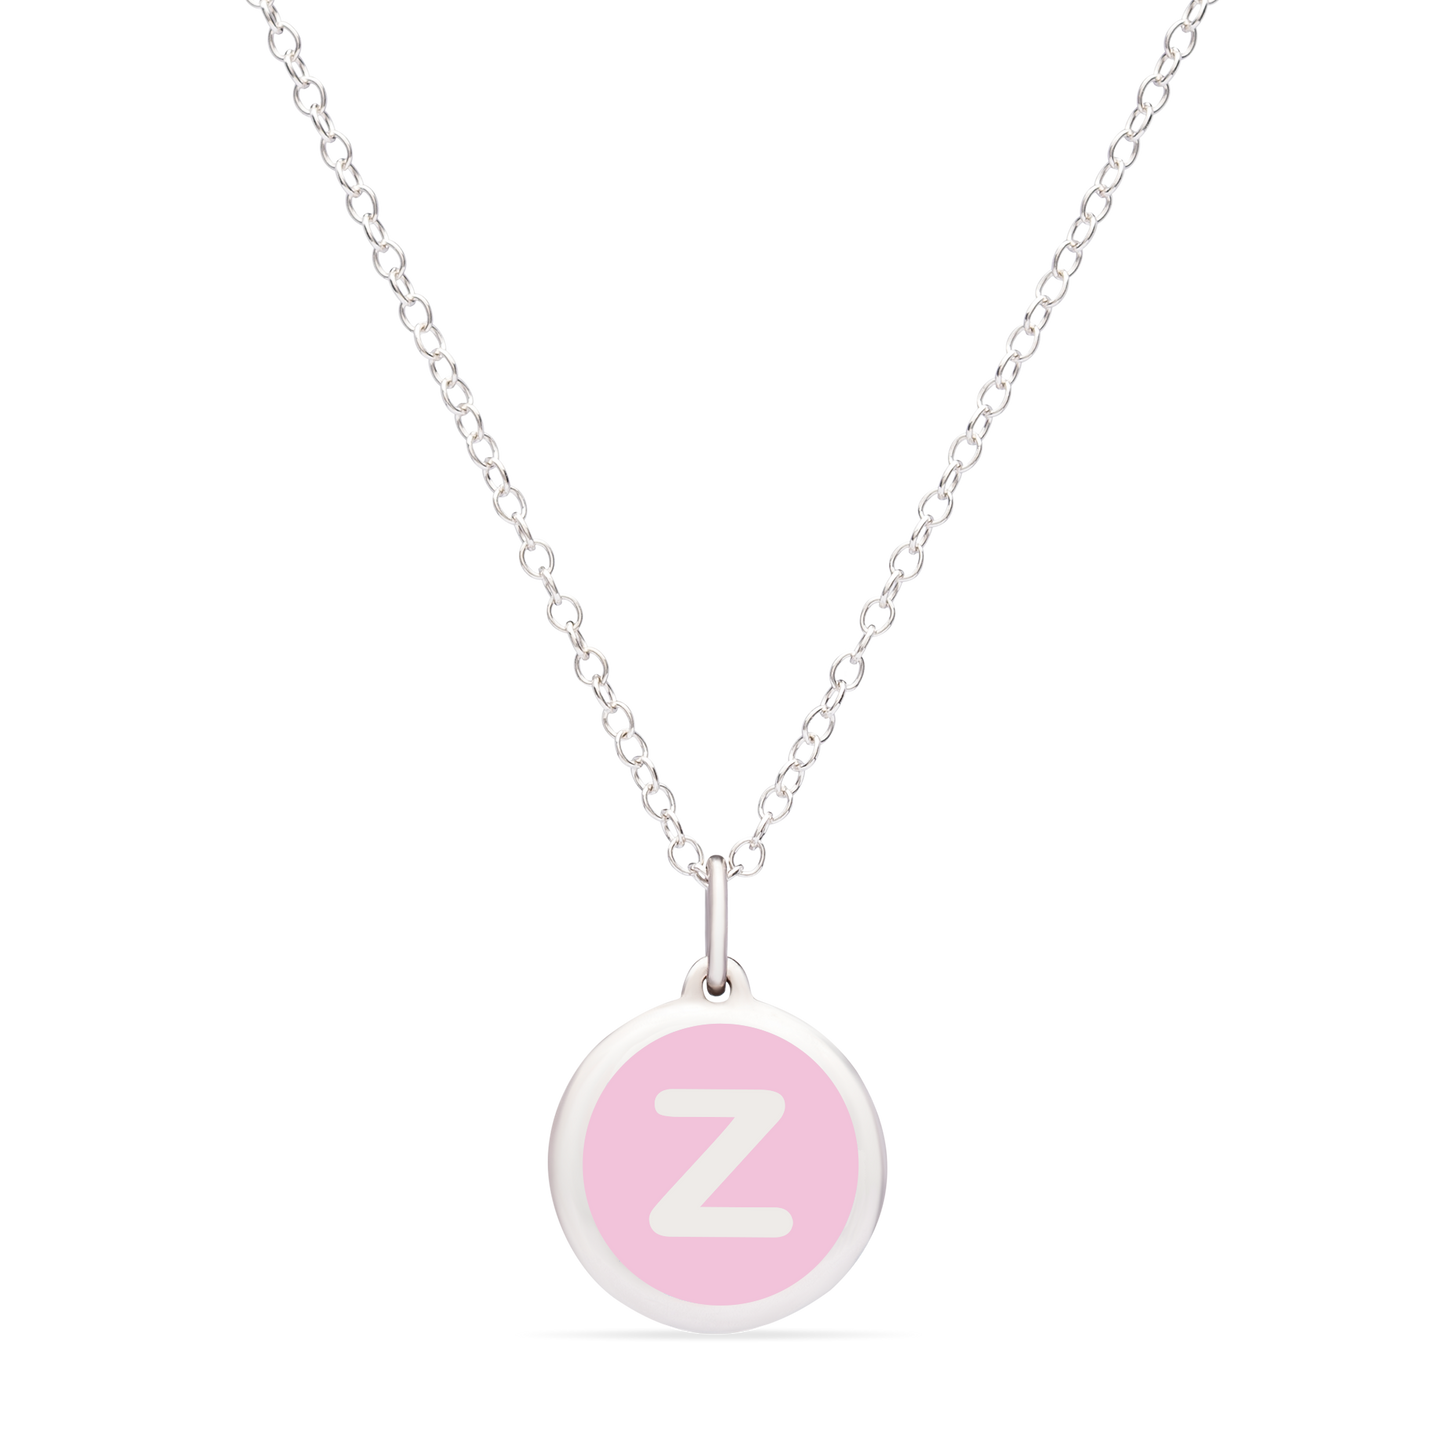 MINI INITIAL 'z' CHARM sterling silver with rhodium plate